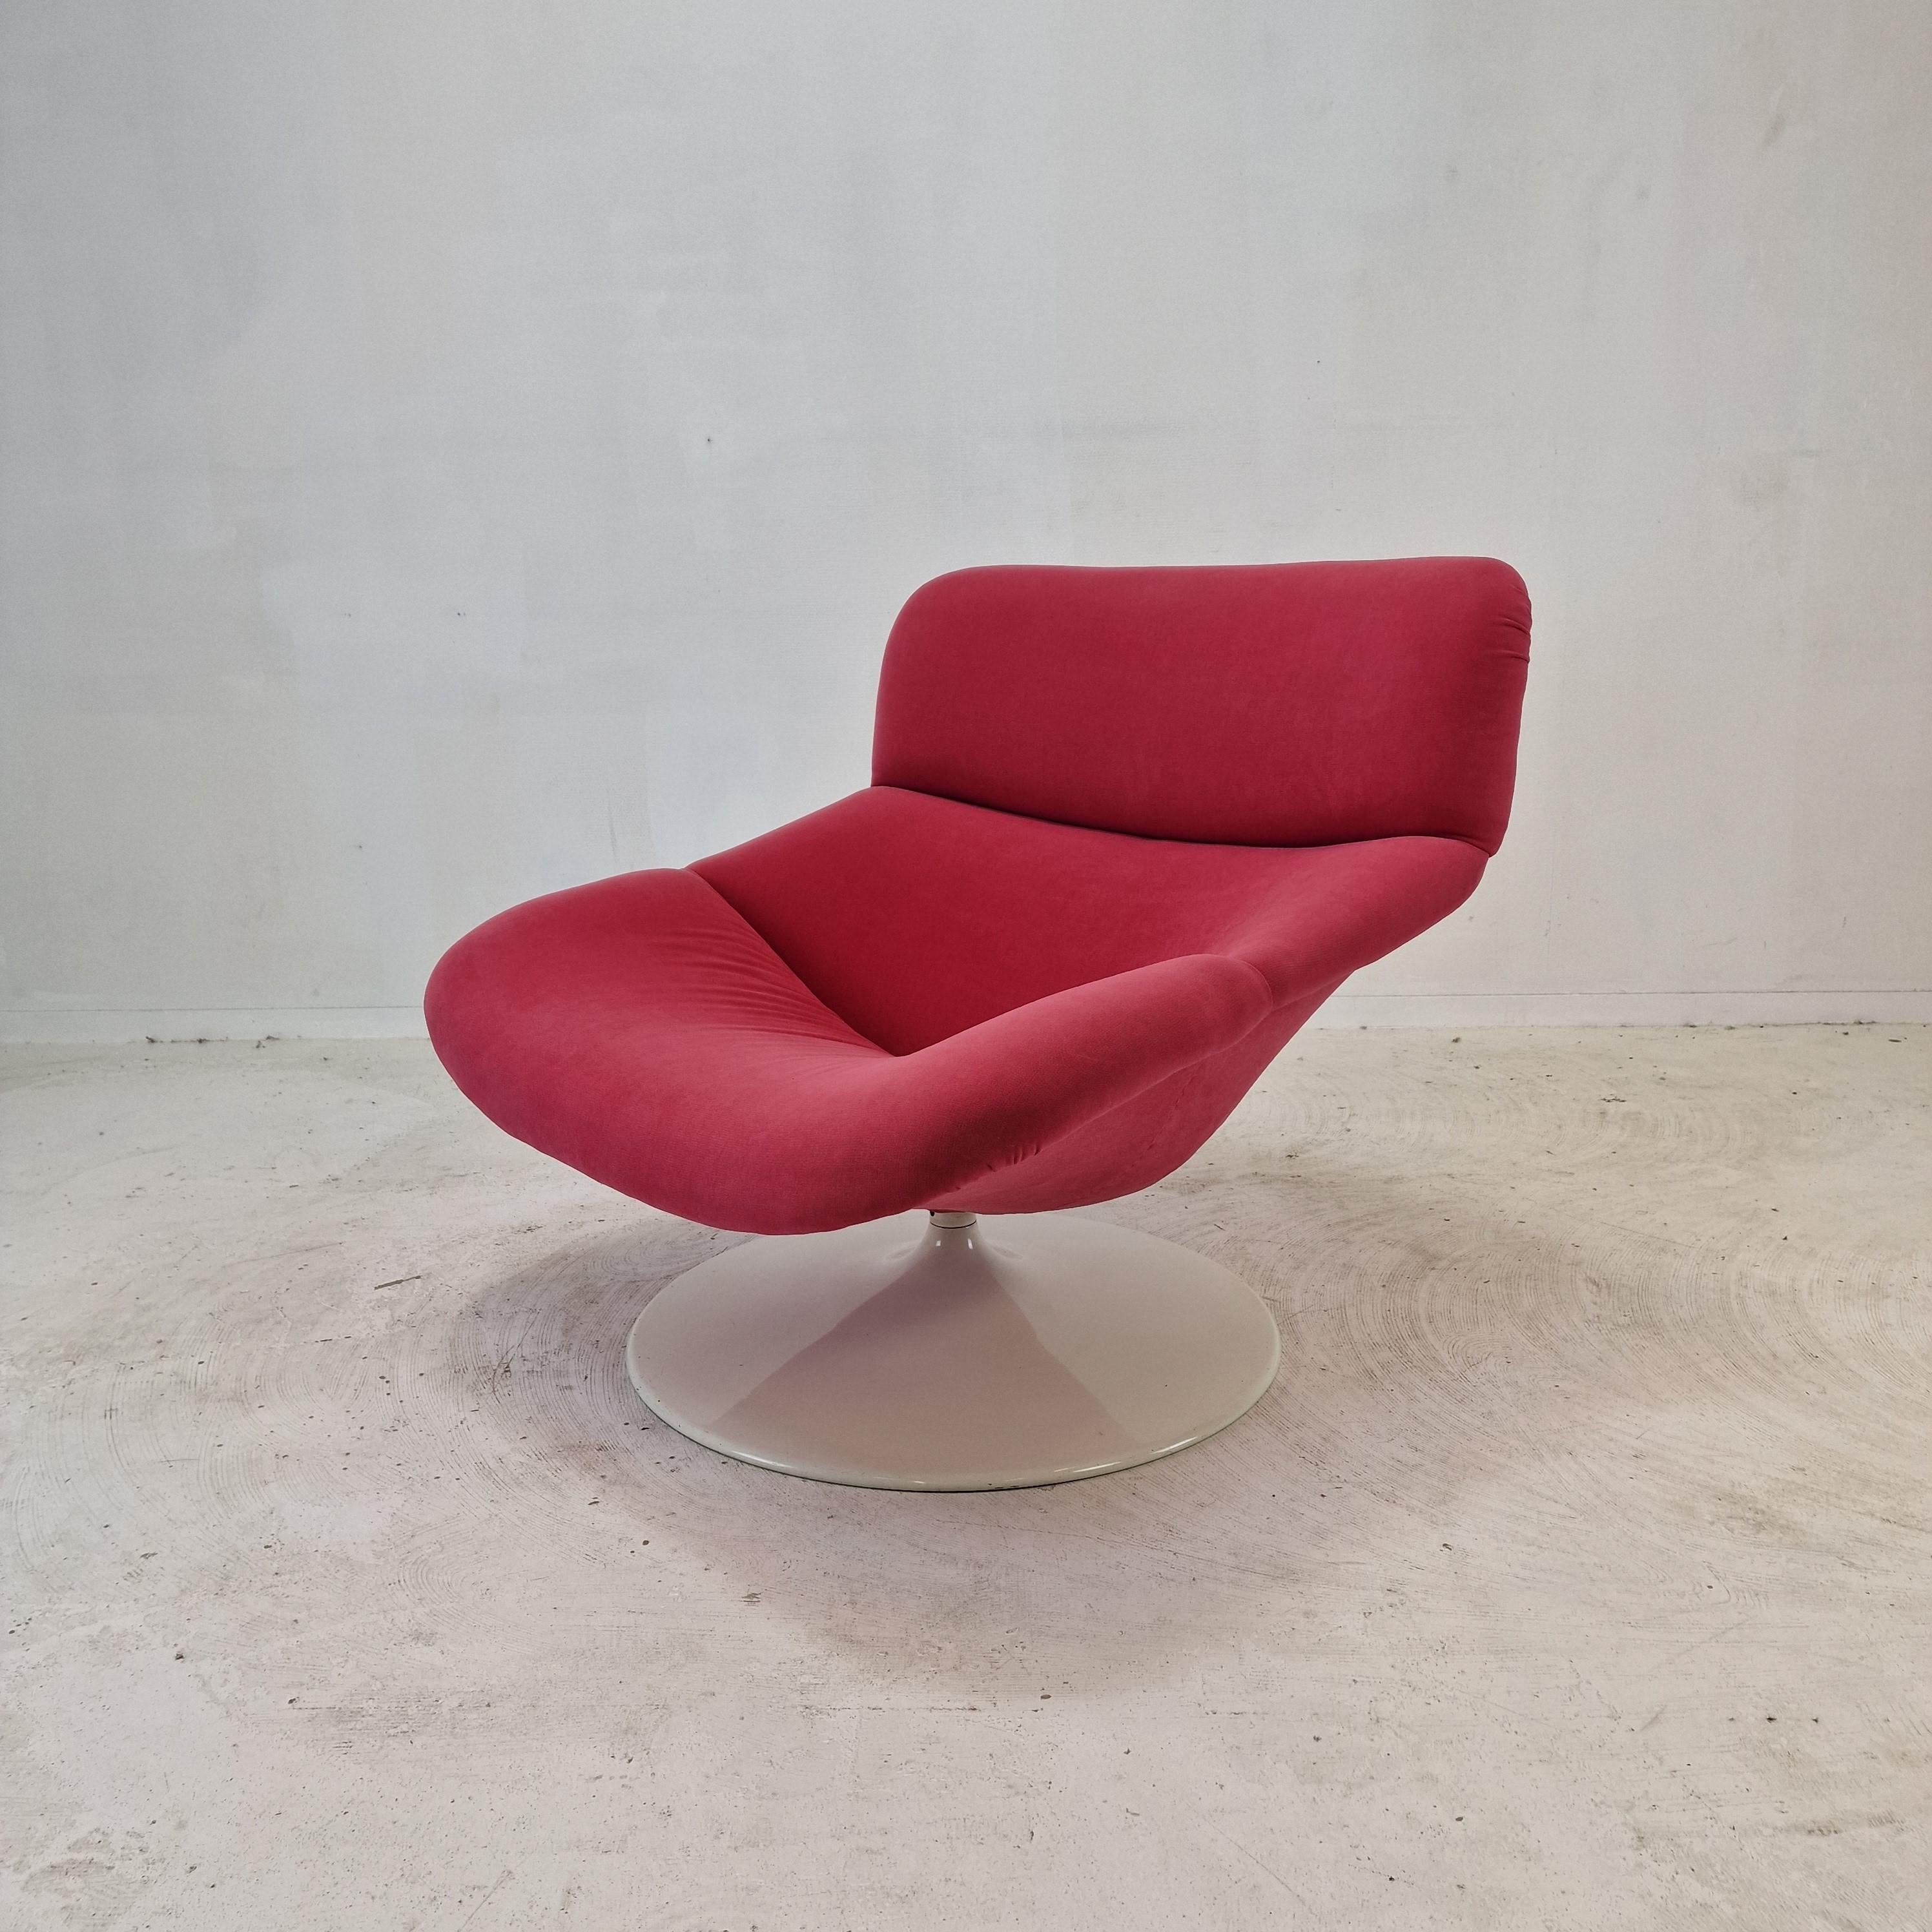 Extremely comfortable Artifort F518 lounge chair.  
Designed by the famous English designer Geoffrey Harcourt in the 70's.   

Very solid wooden frame with a large pivoting metal foot.  
The chair has high quality wool fabric, color fuchsia. 
We